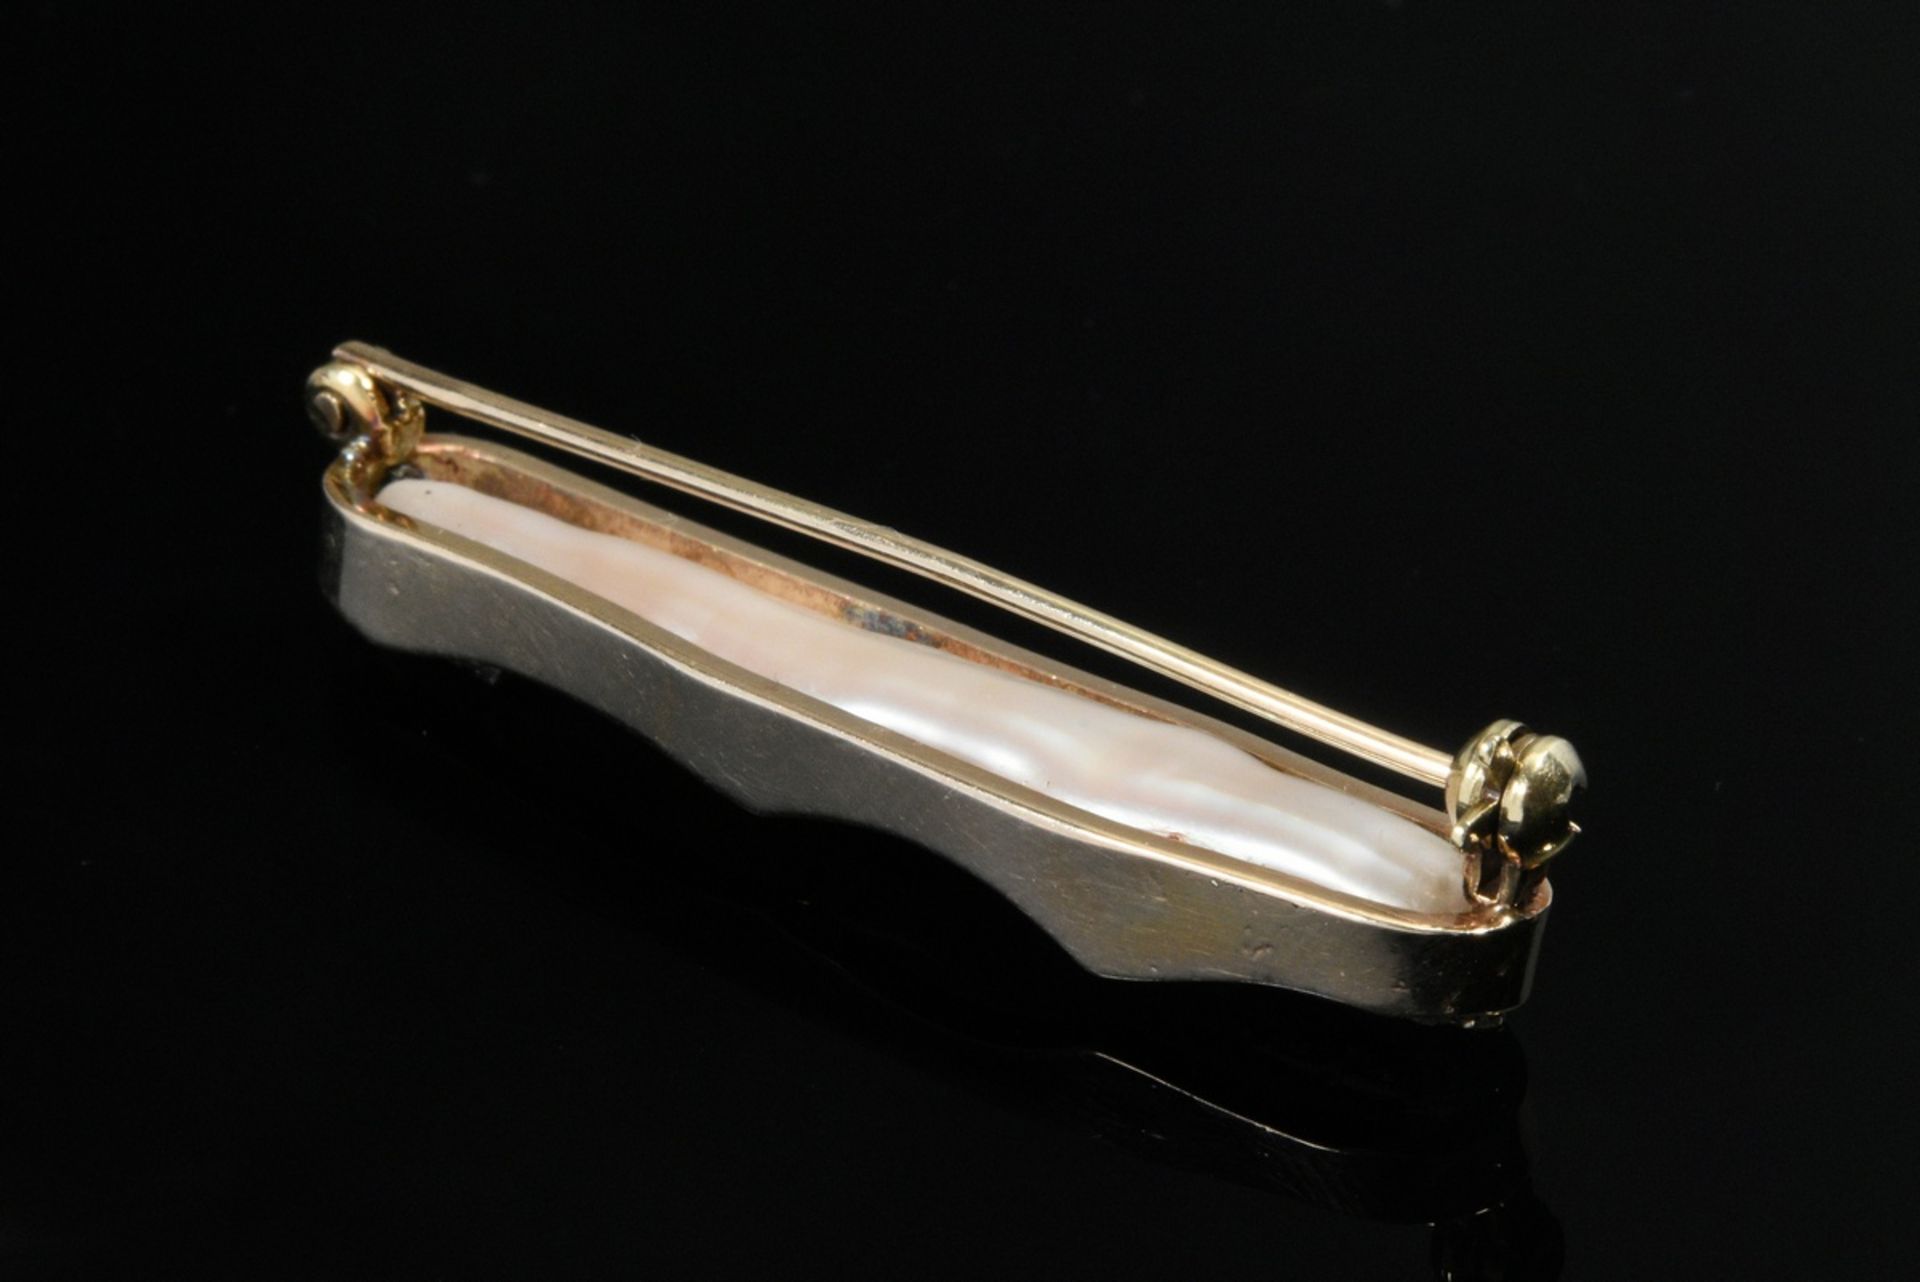 Handmade yellow gold 585 needle with elongated freshwater pearl and small diamond roses in platinum - Image 3 of 3